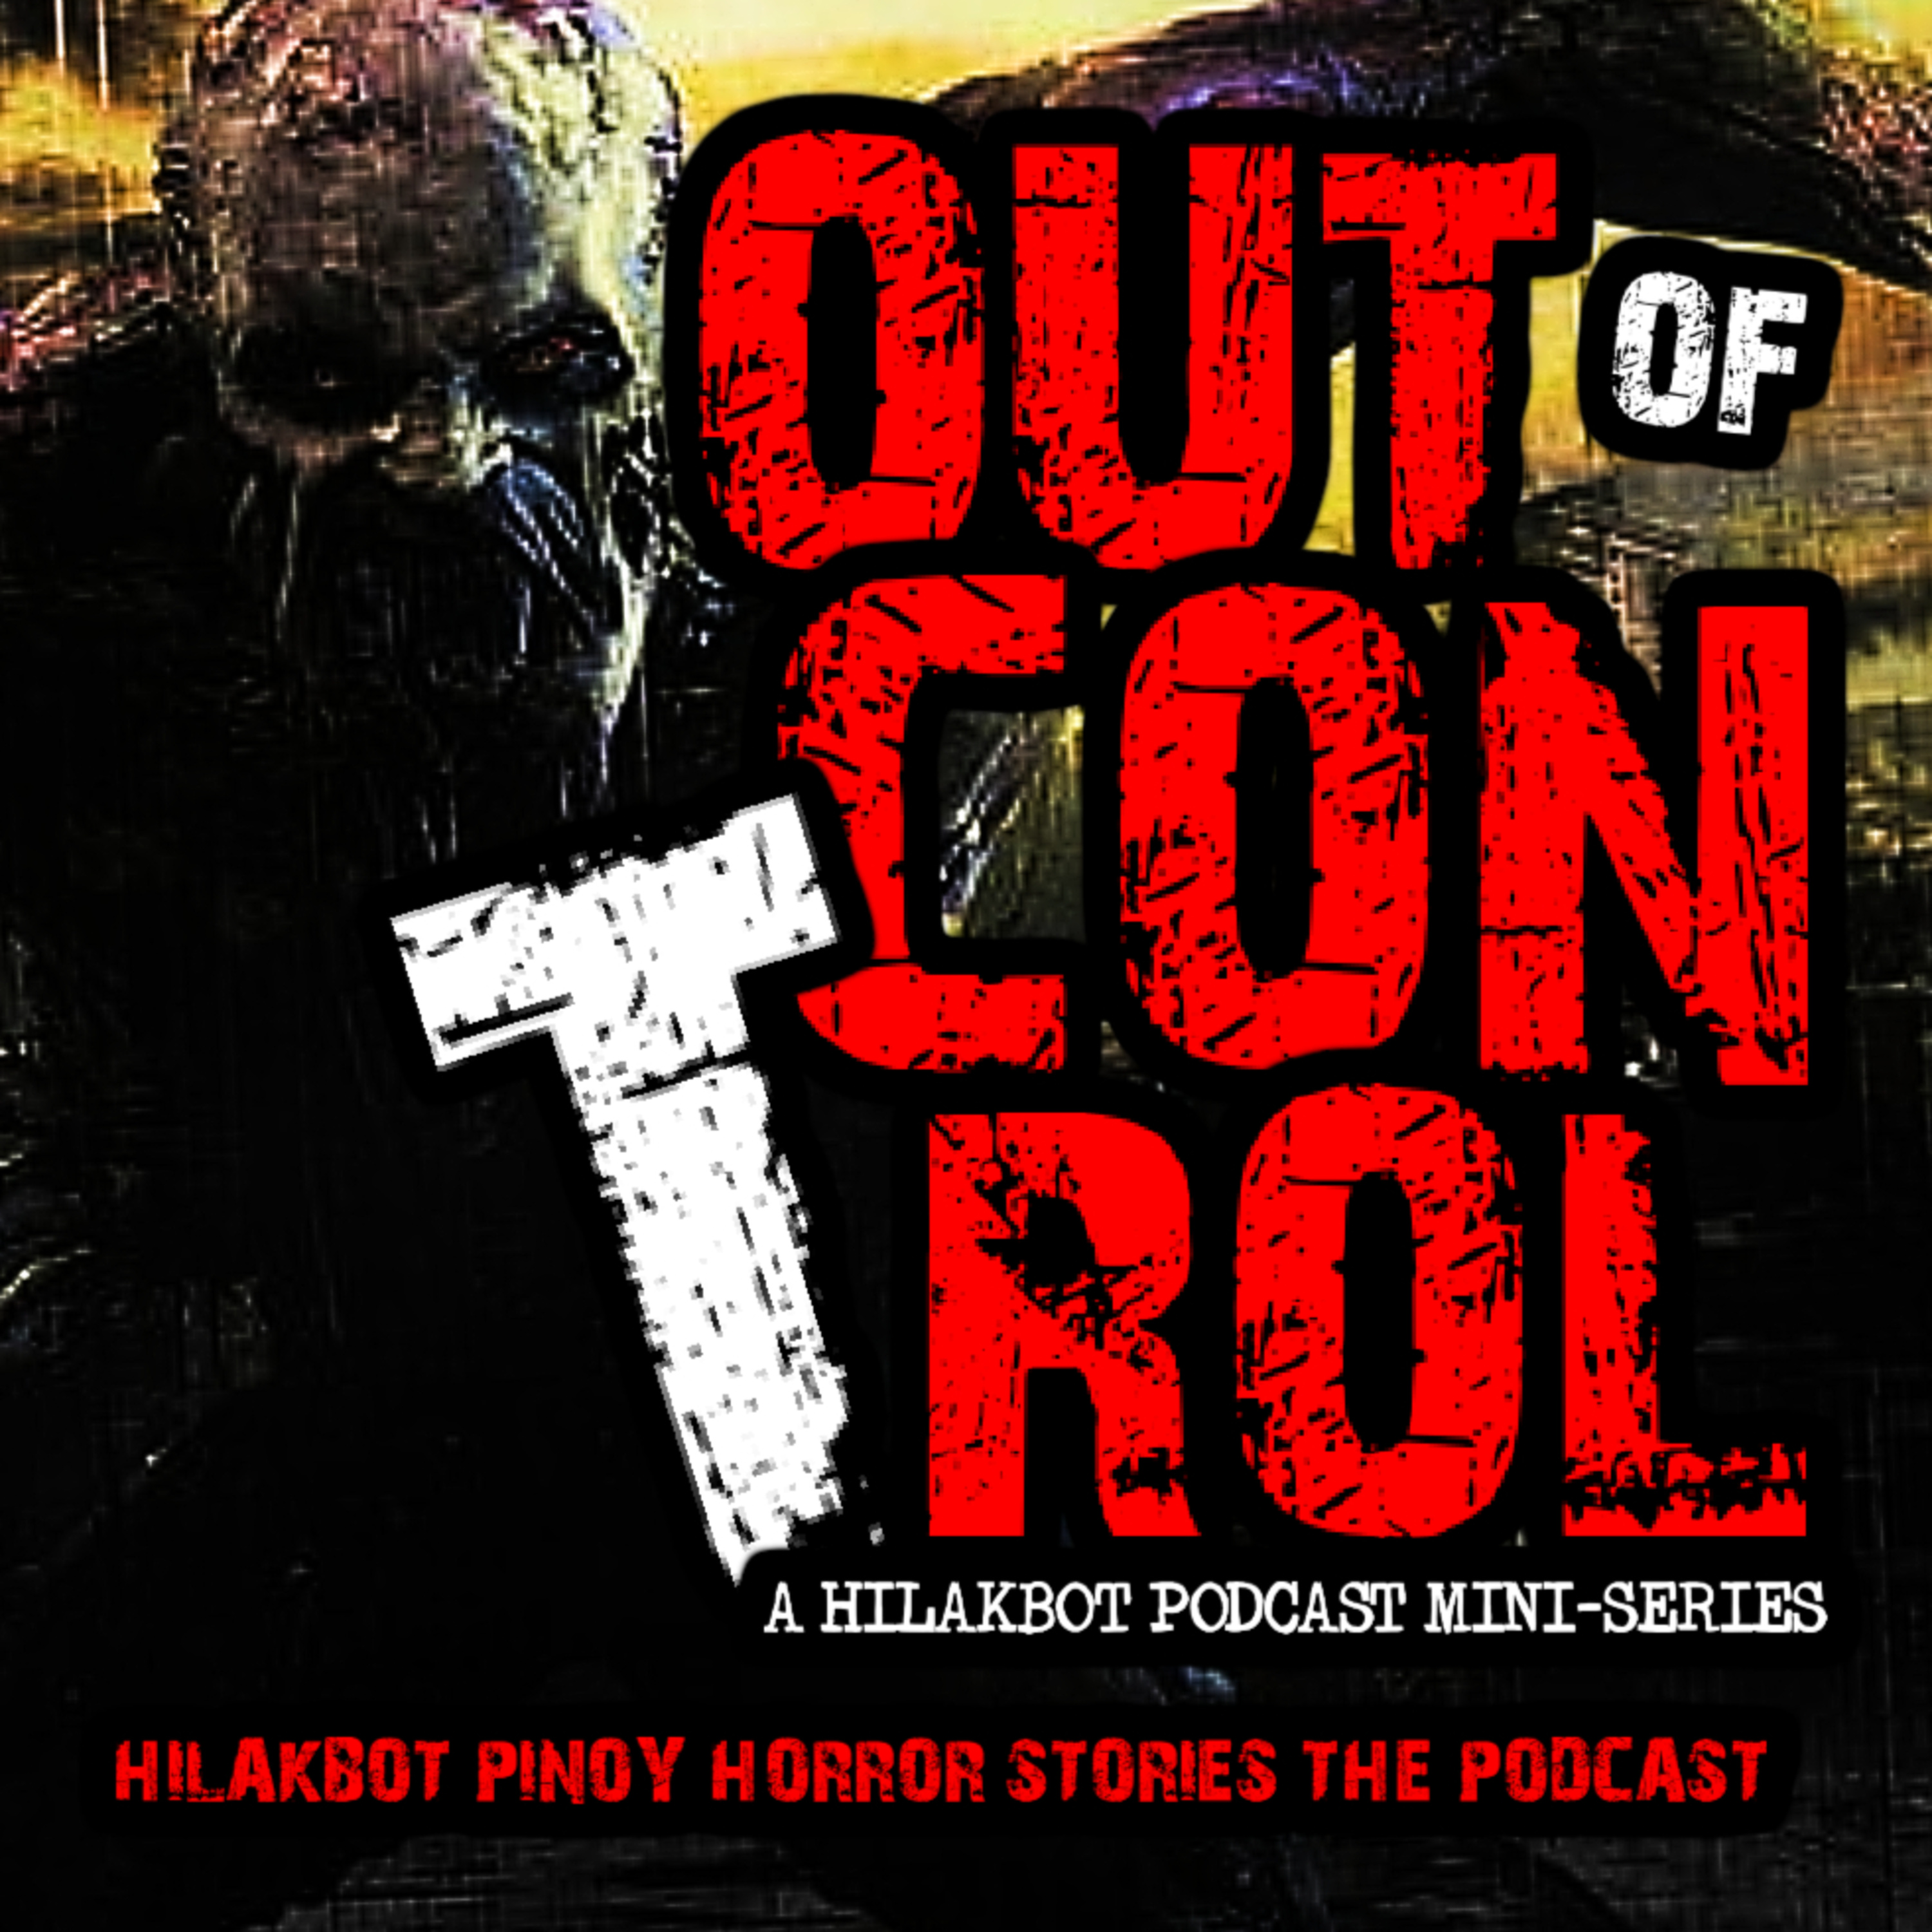 OUT OF CONTROL (Part 2) | Fiction Zombie Story